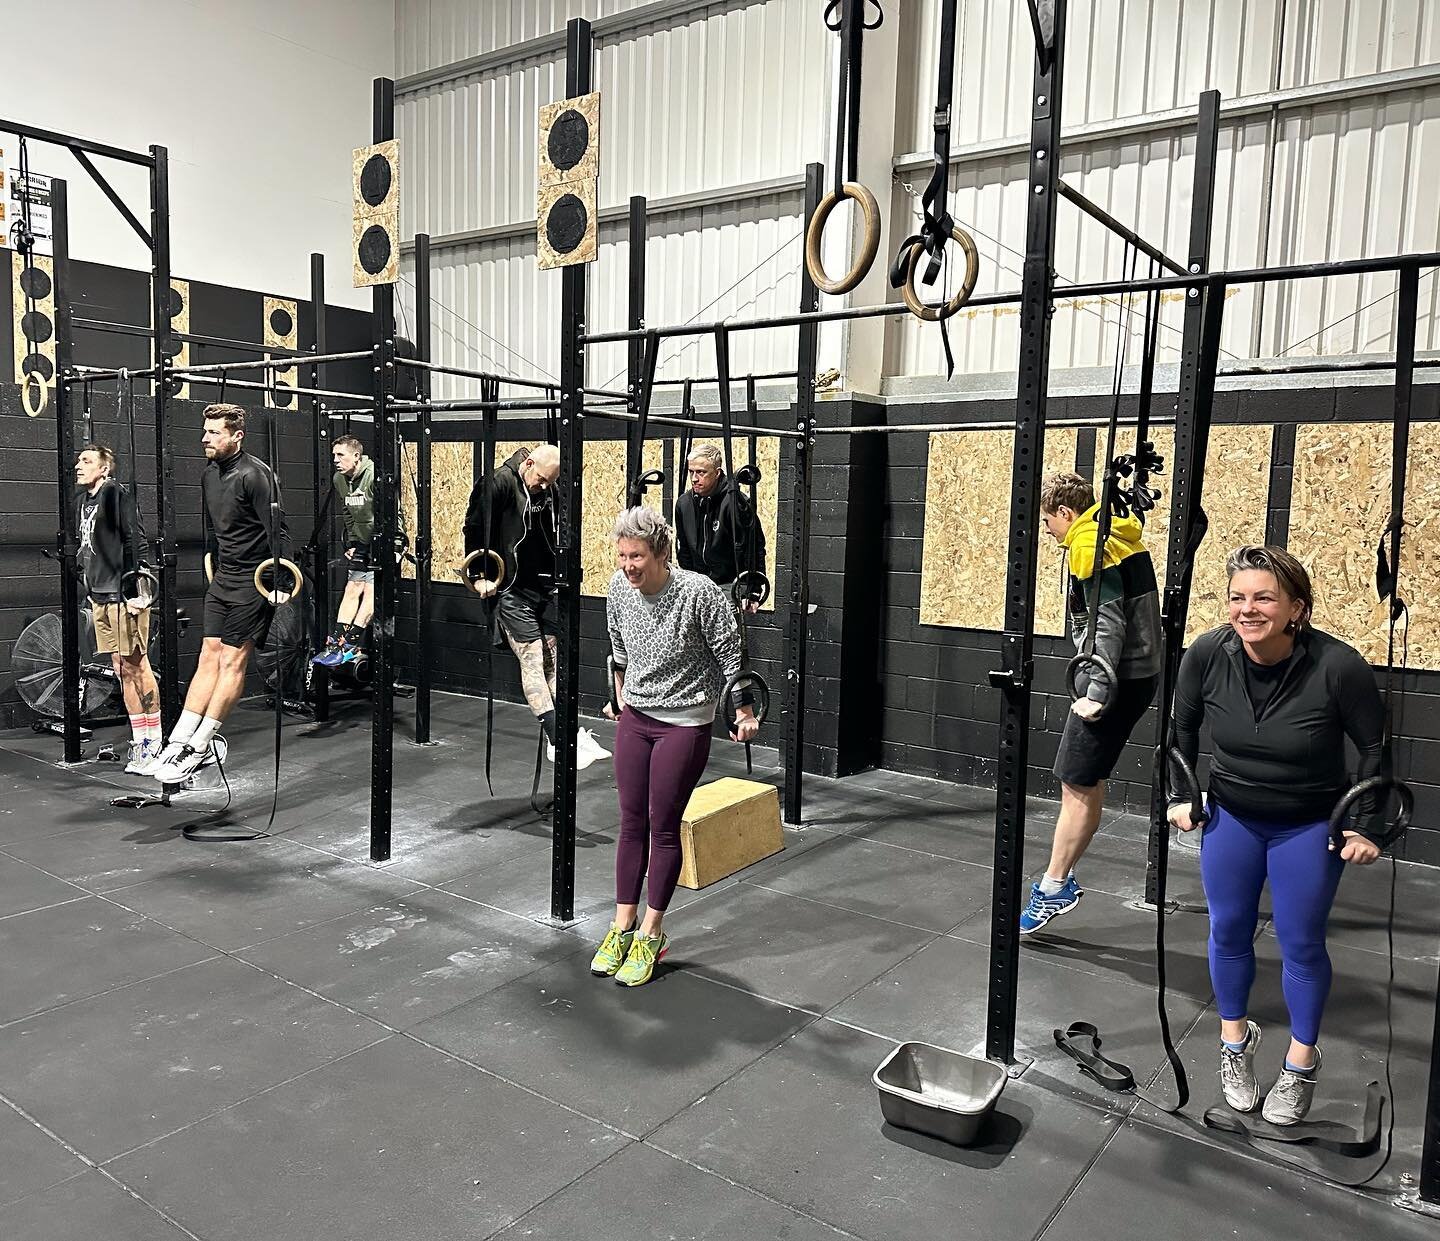 6.15am class getting &ldquo;gymnasticy&rdquo; ✅

Morning, lunchtime and evening classes available throughout the week! 

Message us for a free trial!!

#crossfit #crossfitpoole #fitness #gymnastics